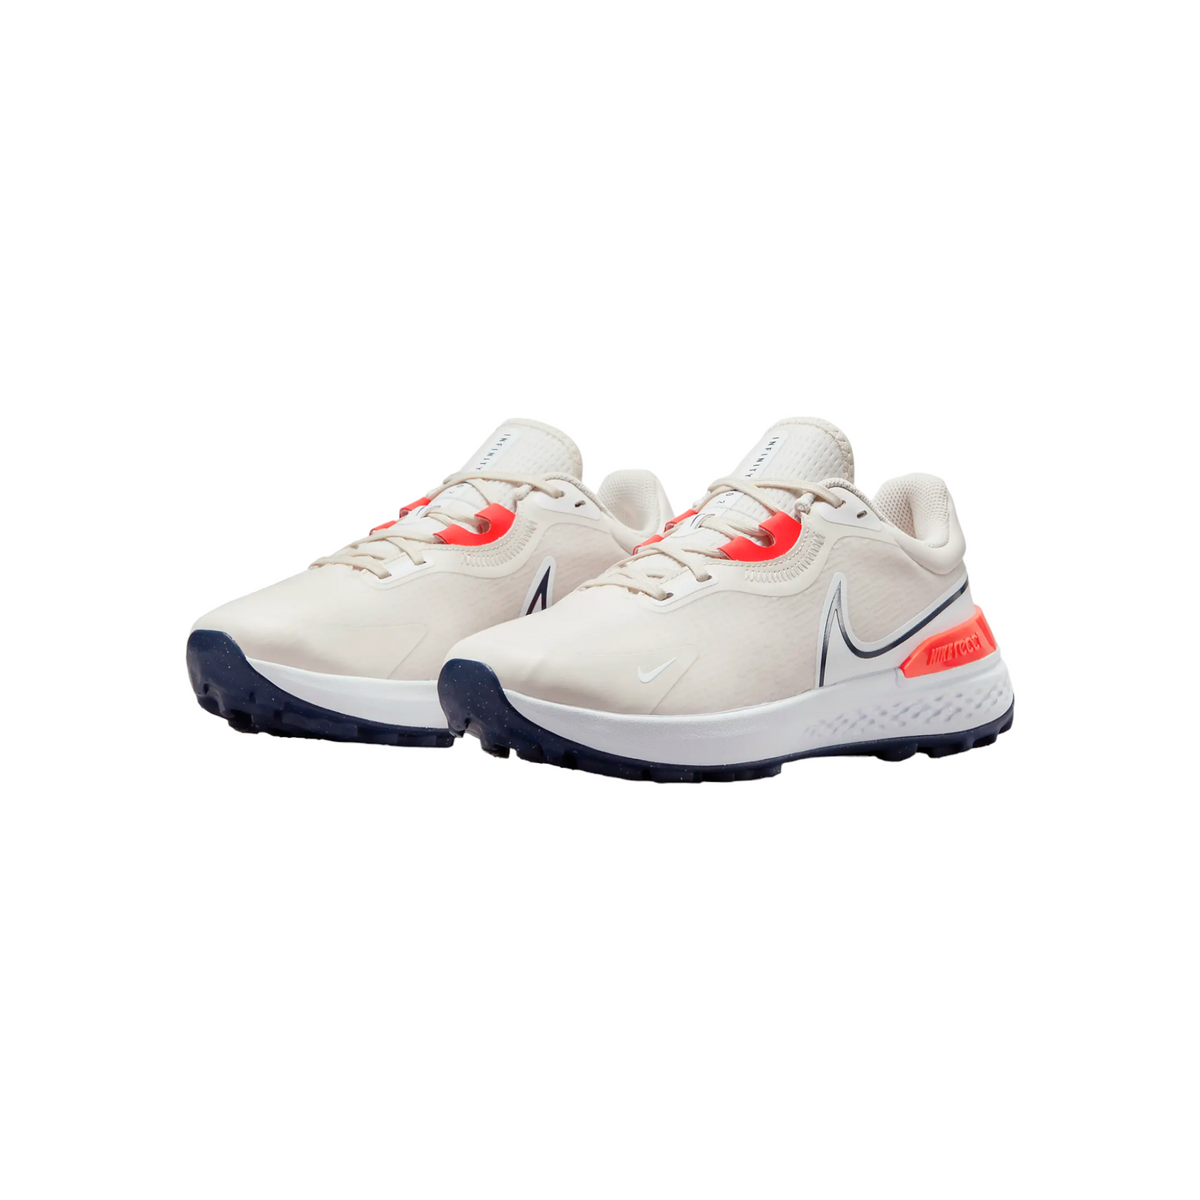 Nike Infinity Pro 2 Golf Shoes - Mens – Canadian Pro Shop Online